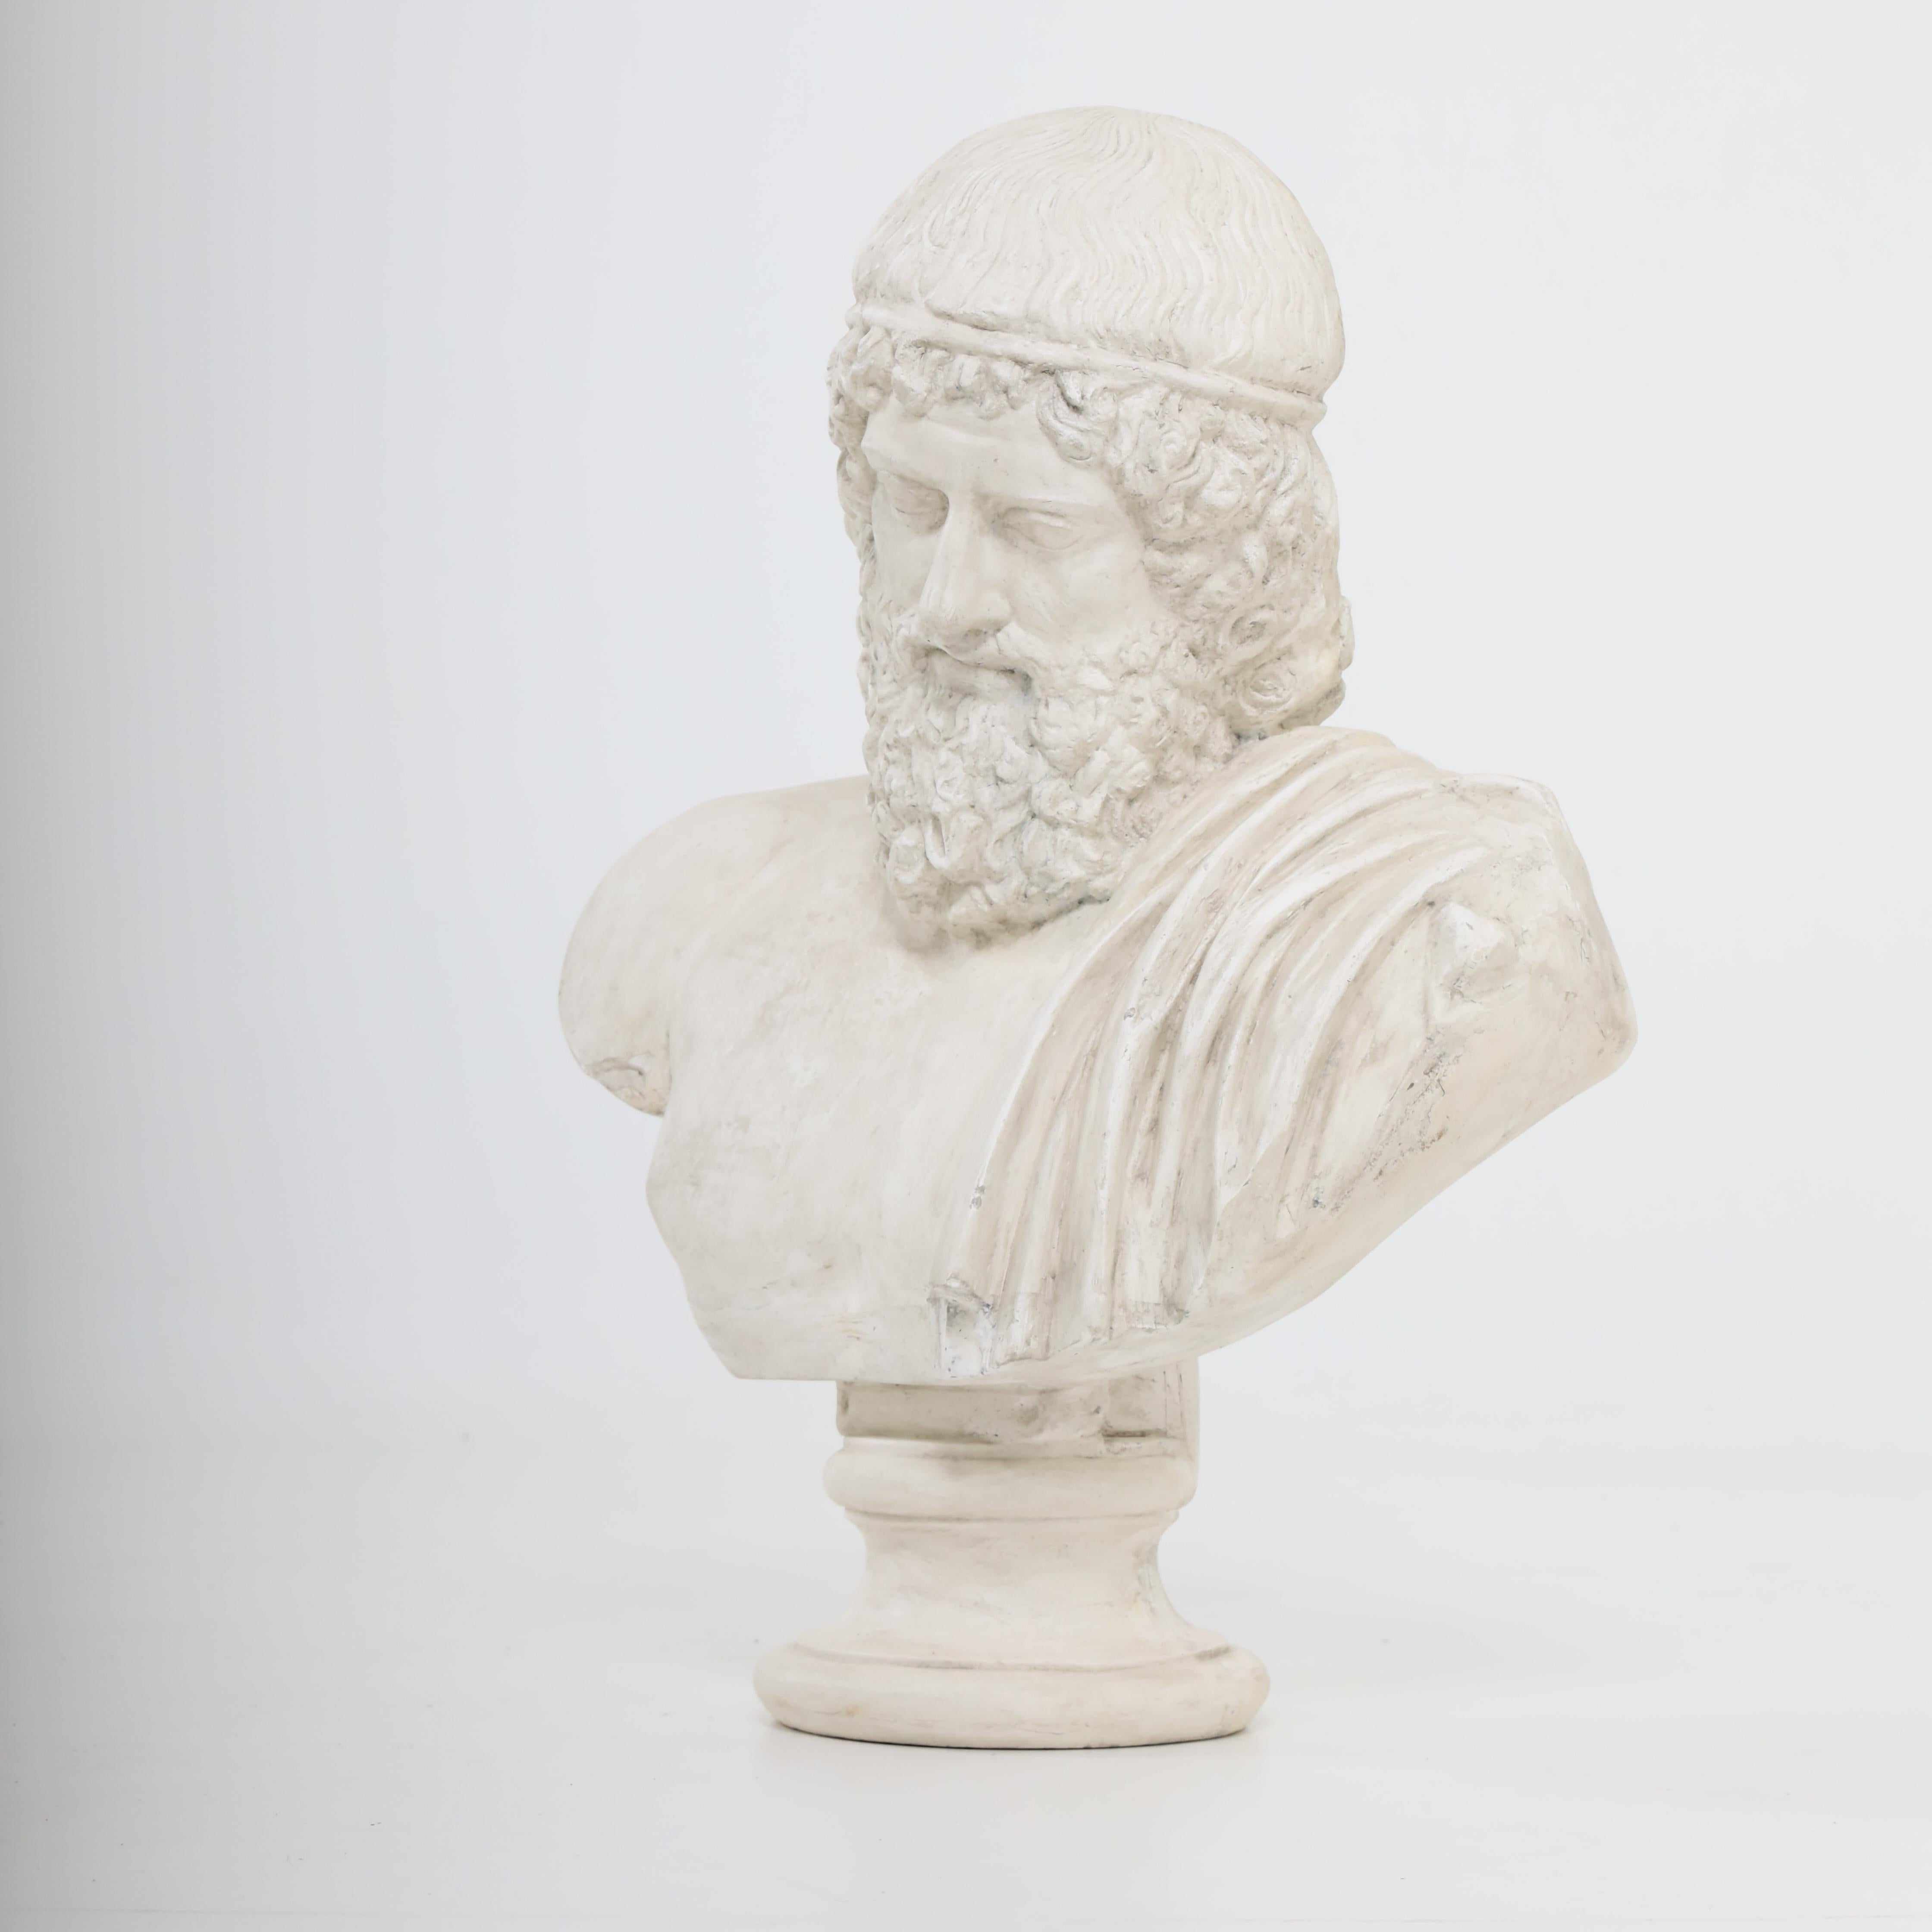 Plaster bust of an ancient, bearded philosopher on a round stand. France 20th century.